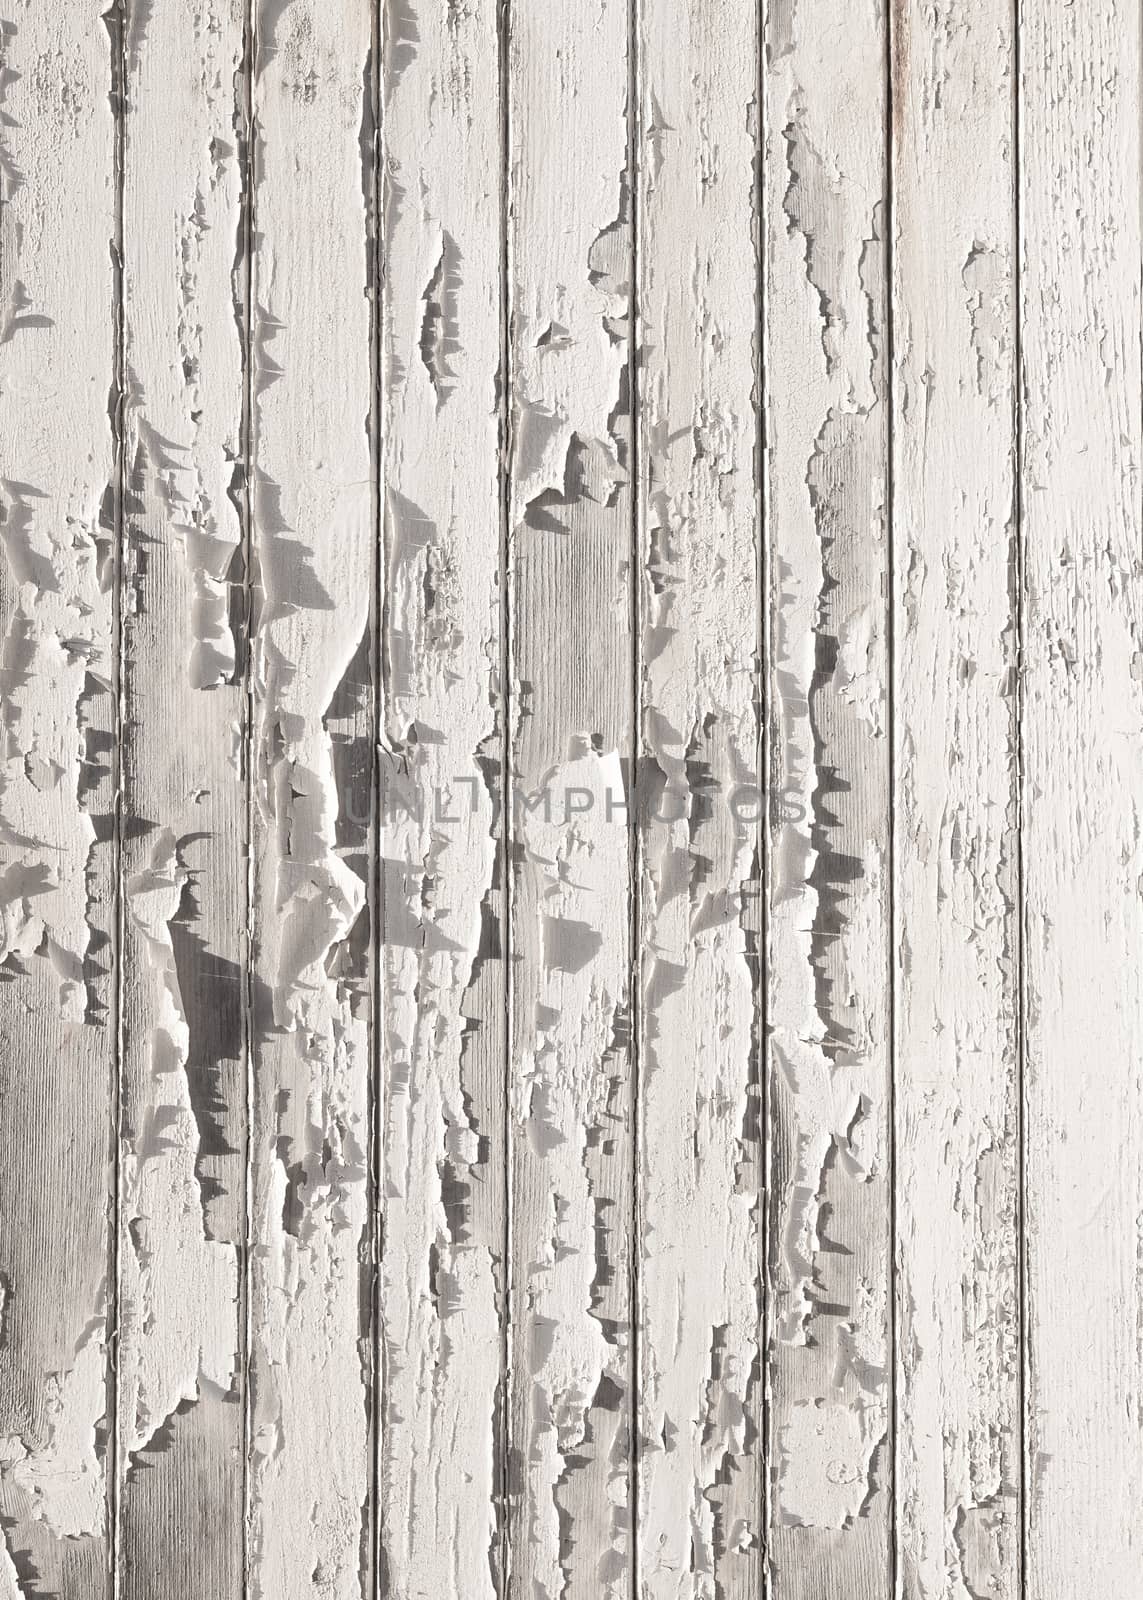 abstract pattern of old white cracked paint on vertical wooden planks